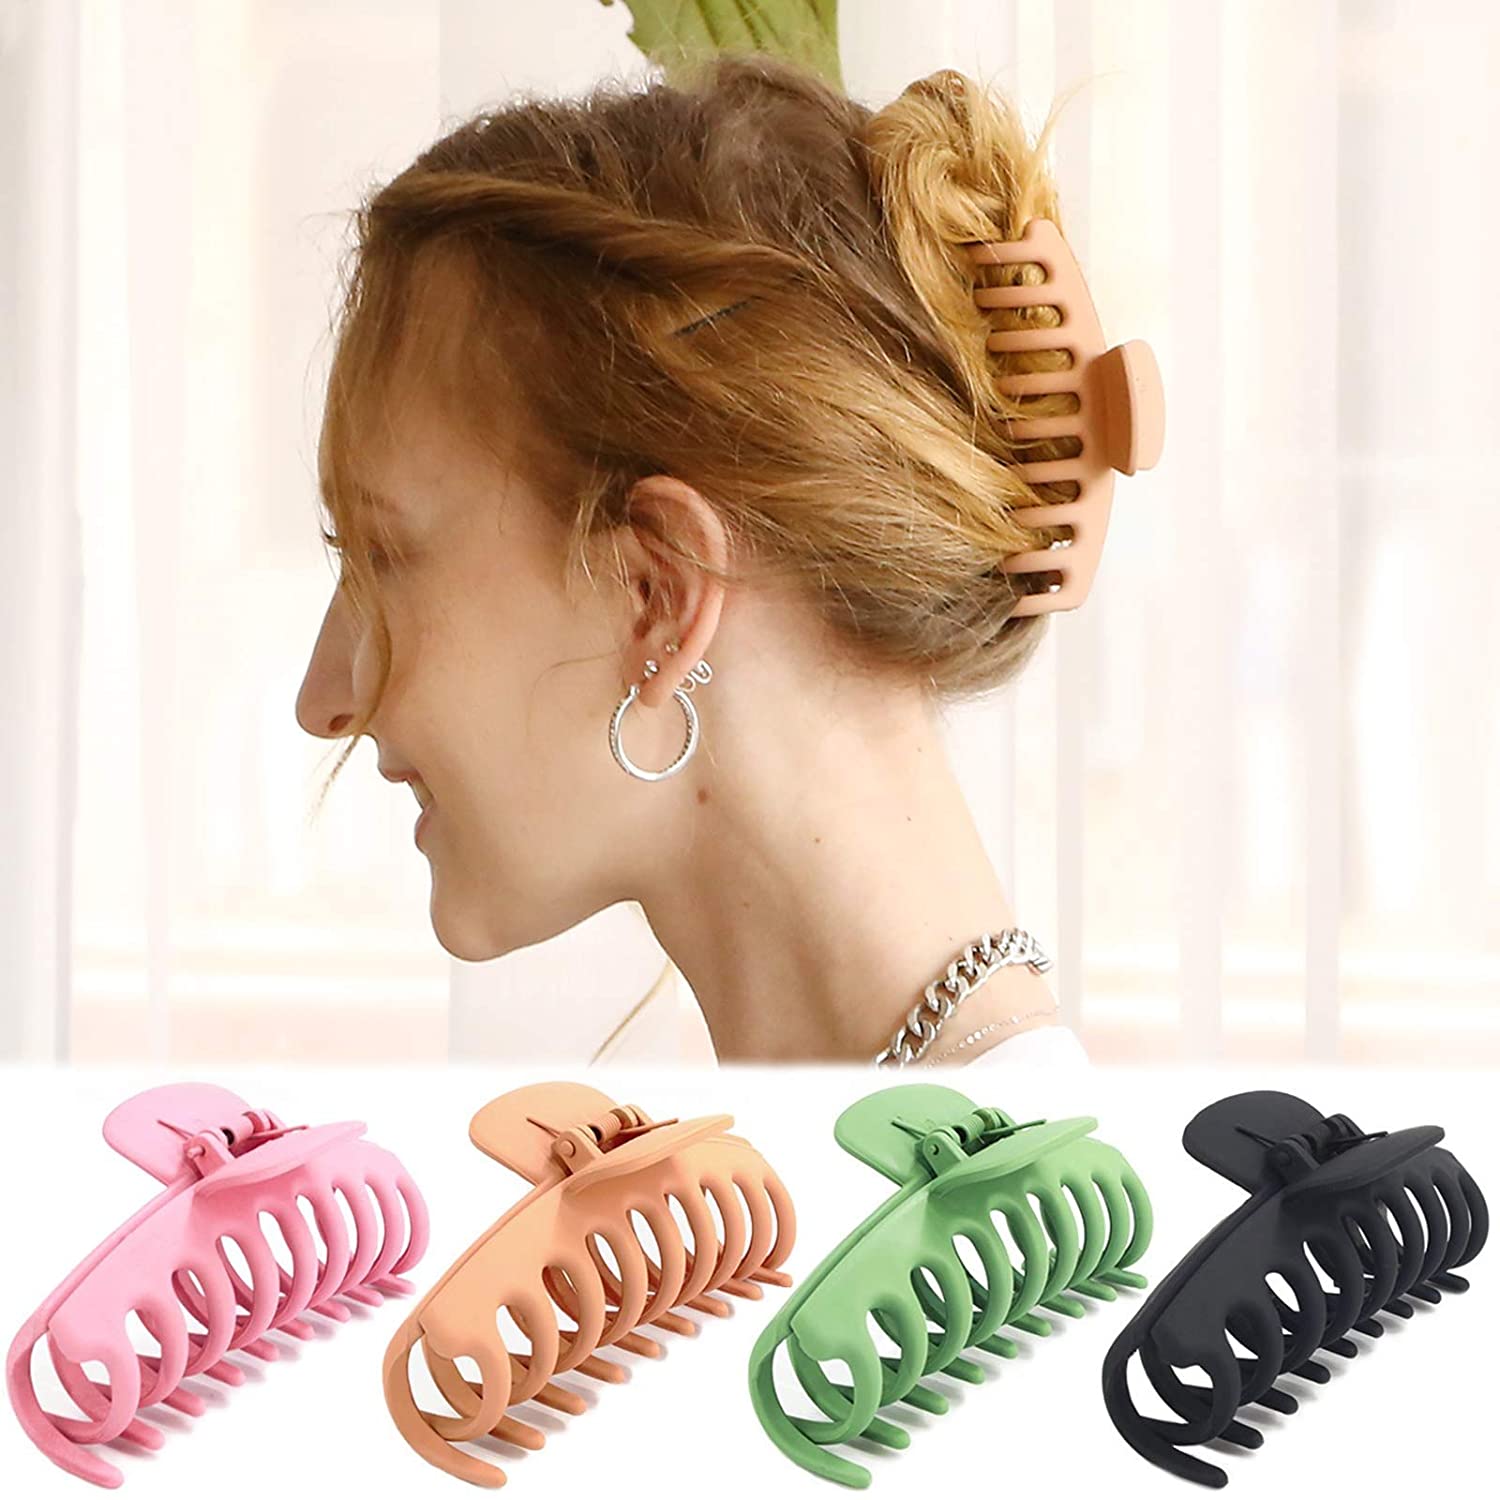 Big Hair Claw Clips 4.3 Inch Nonslip Large Claw Clip for Women and Girls Thin Hair, 90's Strong Hold Hair Clips for Thick Hair, 4 Color Available (4 Packs) - image 2 of 6